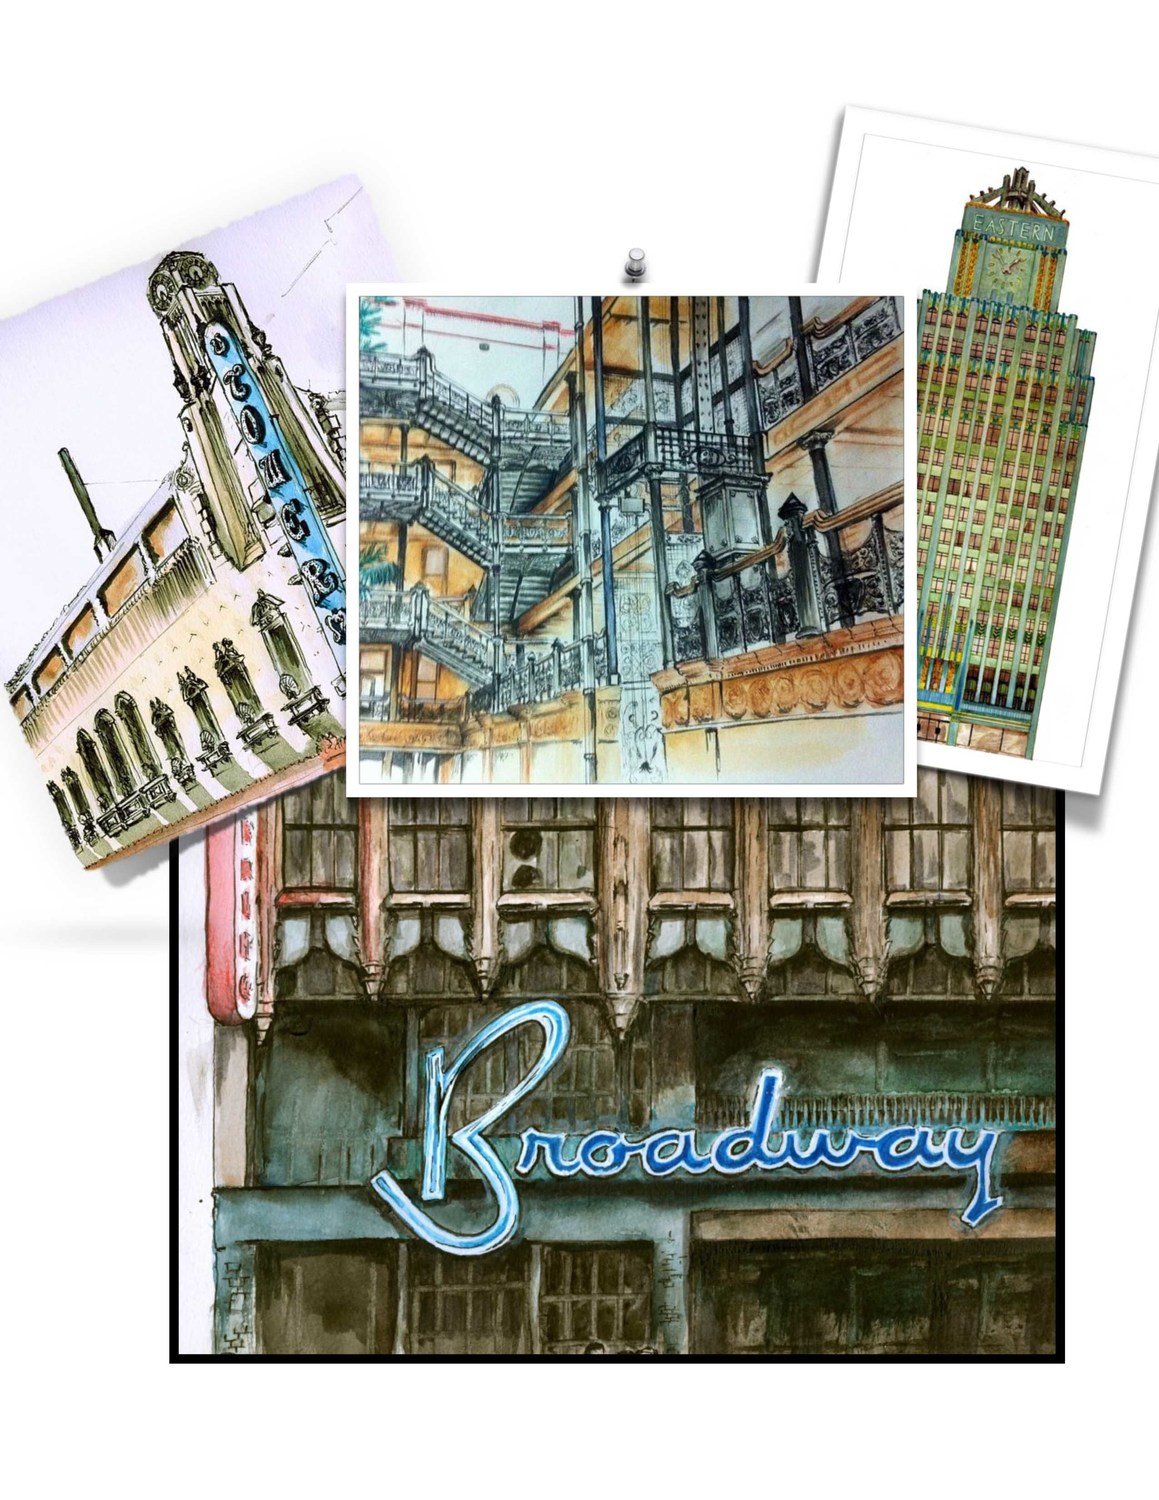 My Book - Illustrated tour of Broadway in Downtown Los Angeles